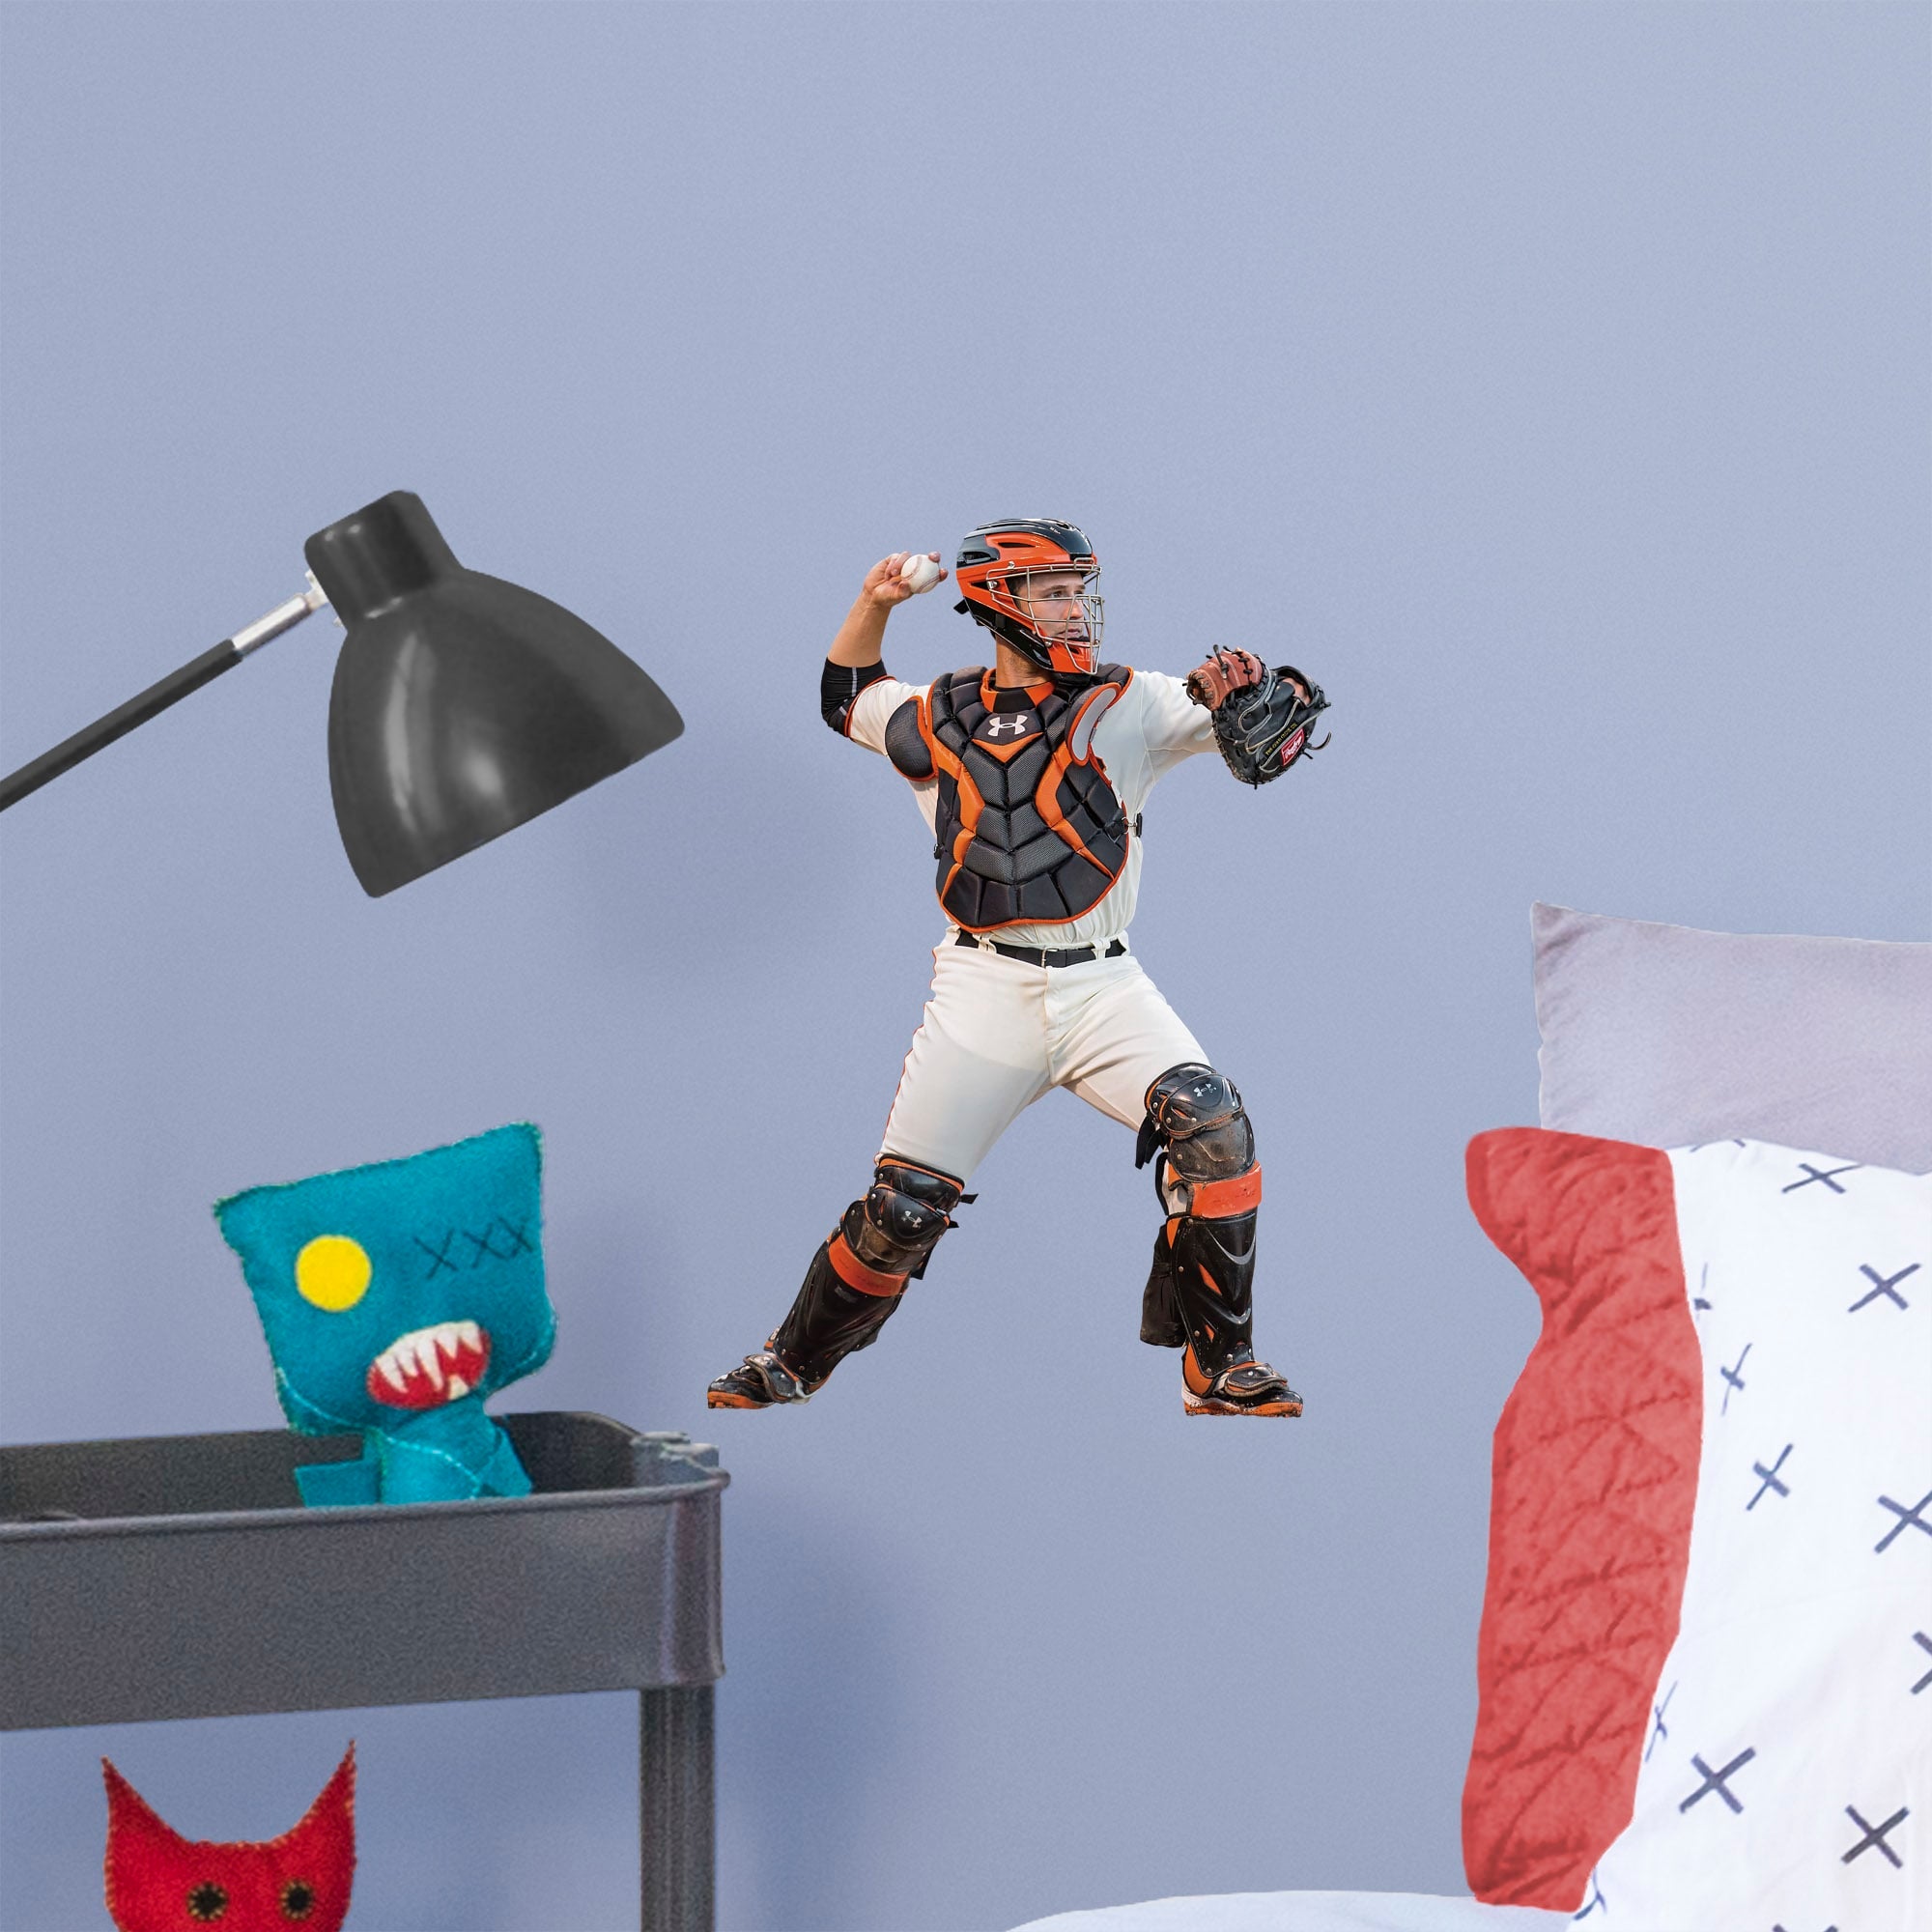 Buster Posey for San Francisco Giants: Catcher - Officially Licensed MLB Removable Wall Decal Large by Fathead | Vinyl